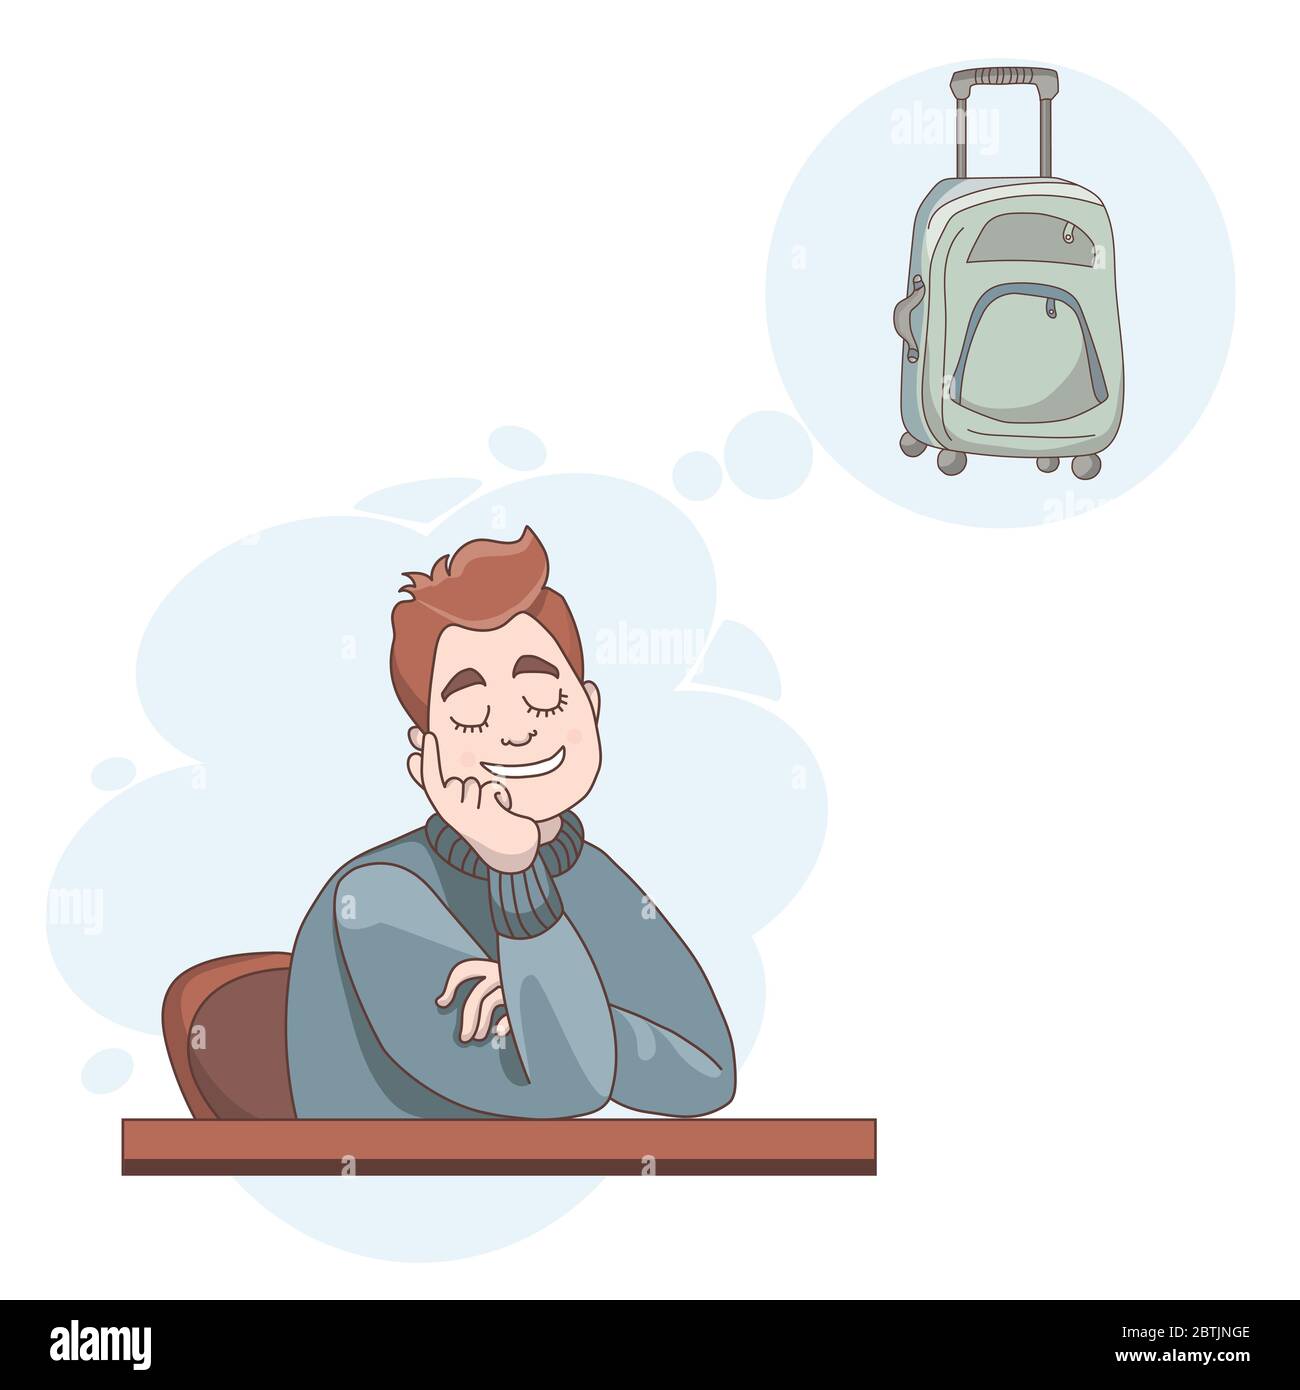 Vector illustration. The man sitting at the table closed his eyes and dreams. Above it is a drawing of a suitcase on wheels for traveling. Stock Vector